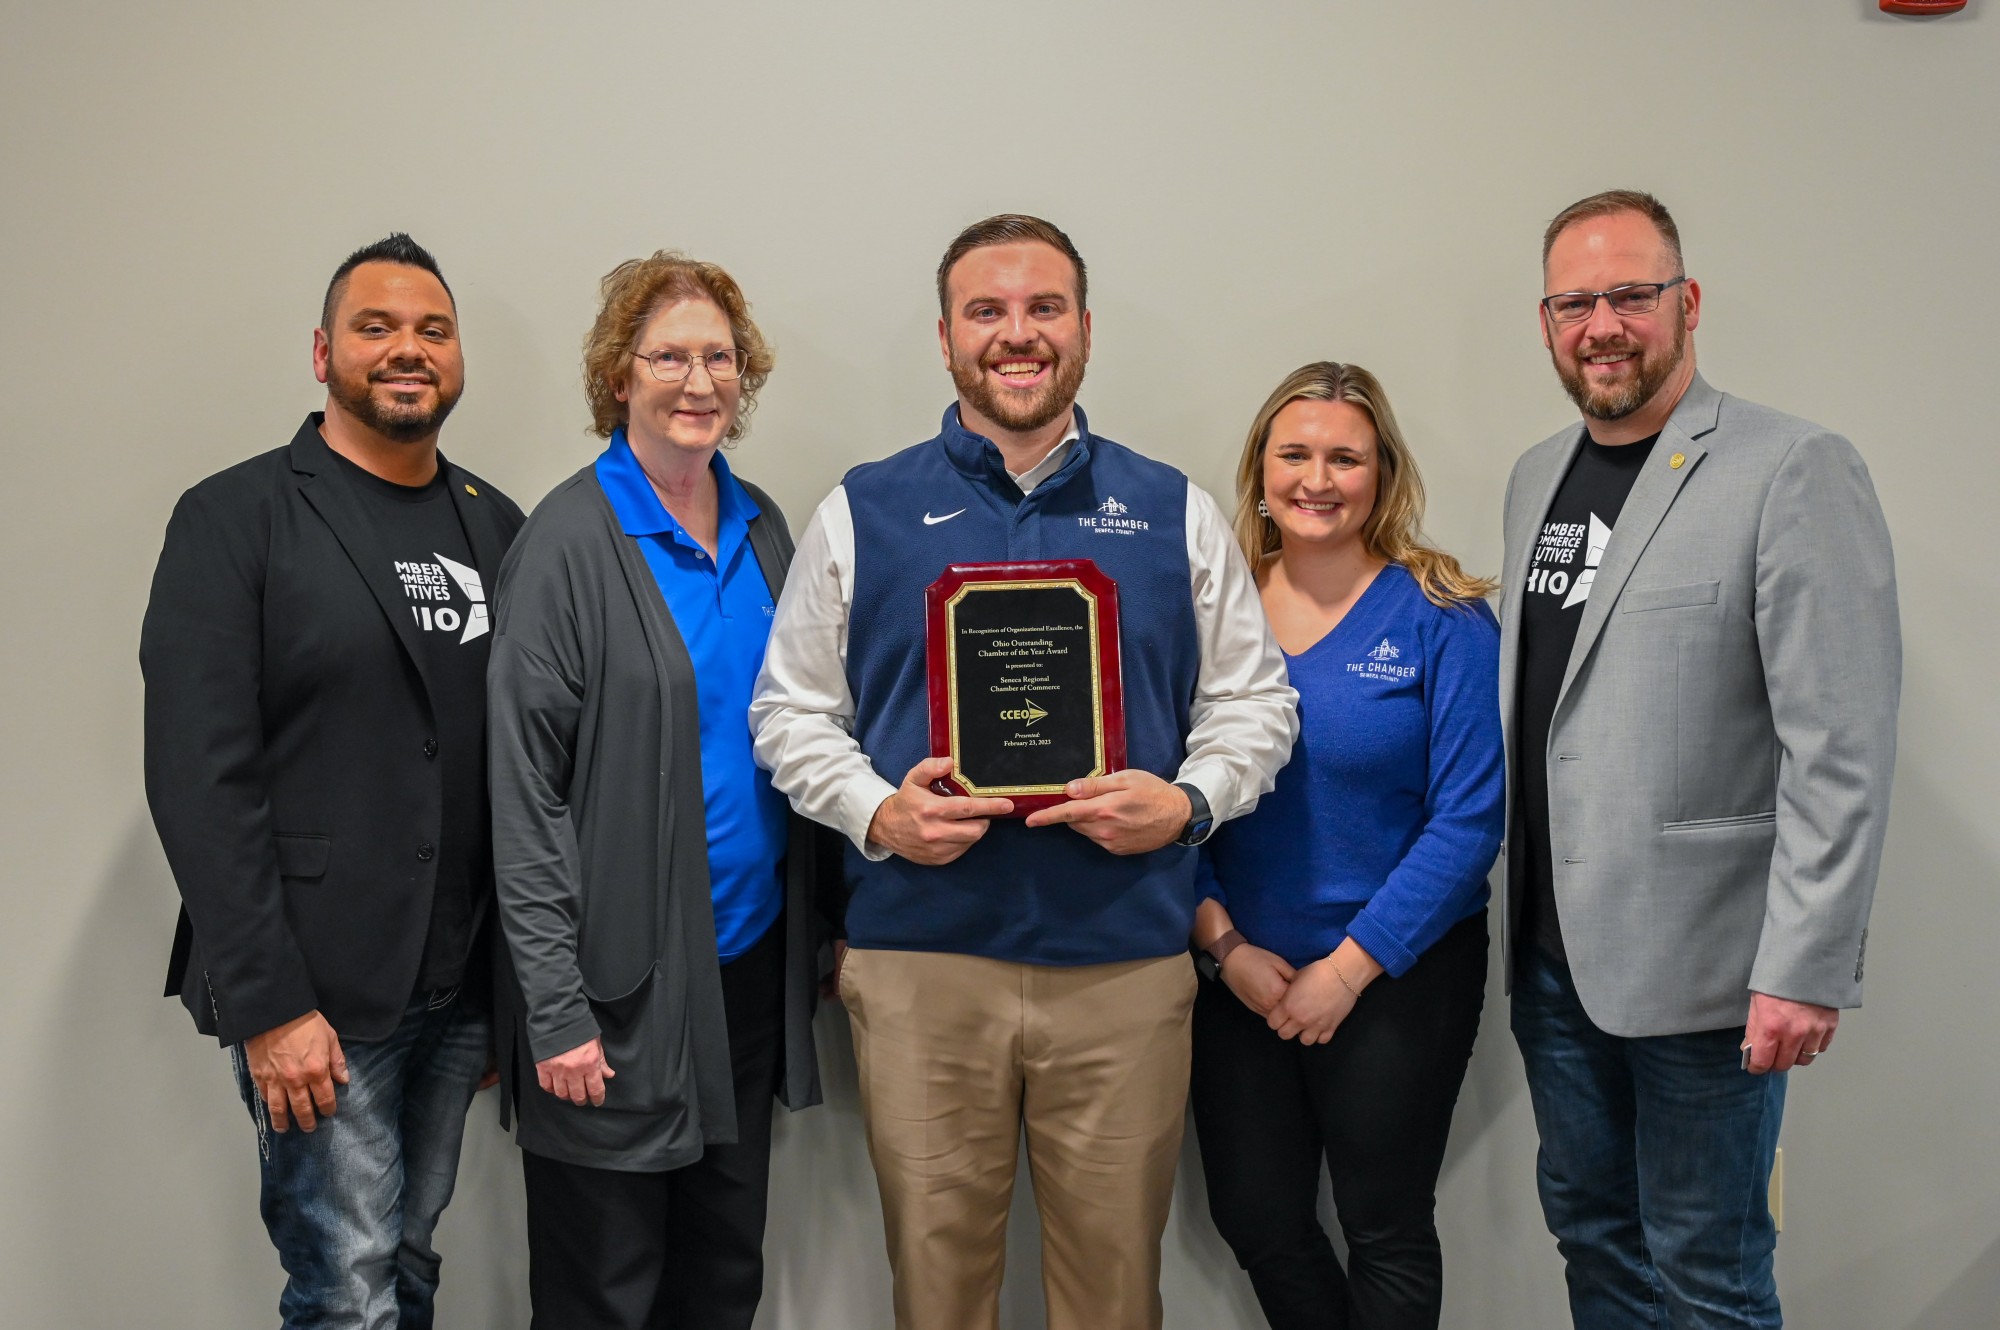 Seneca Regional Chamber of Commerce Receives Statewide Recognition